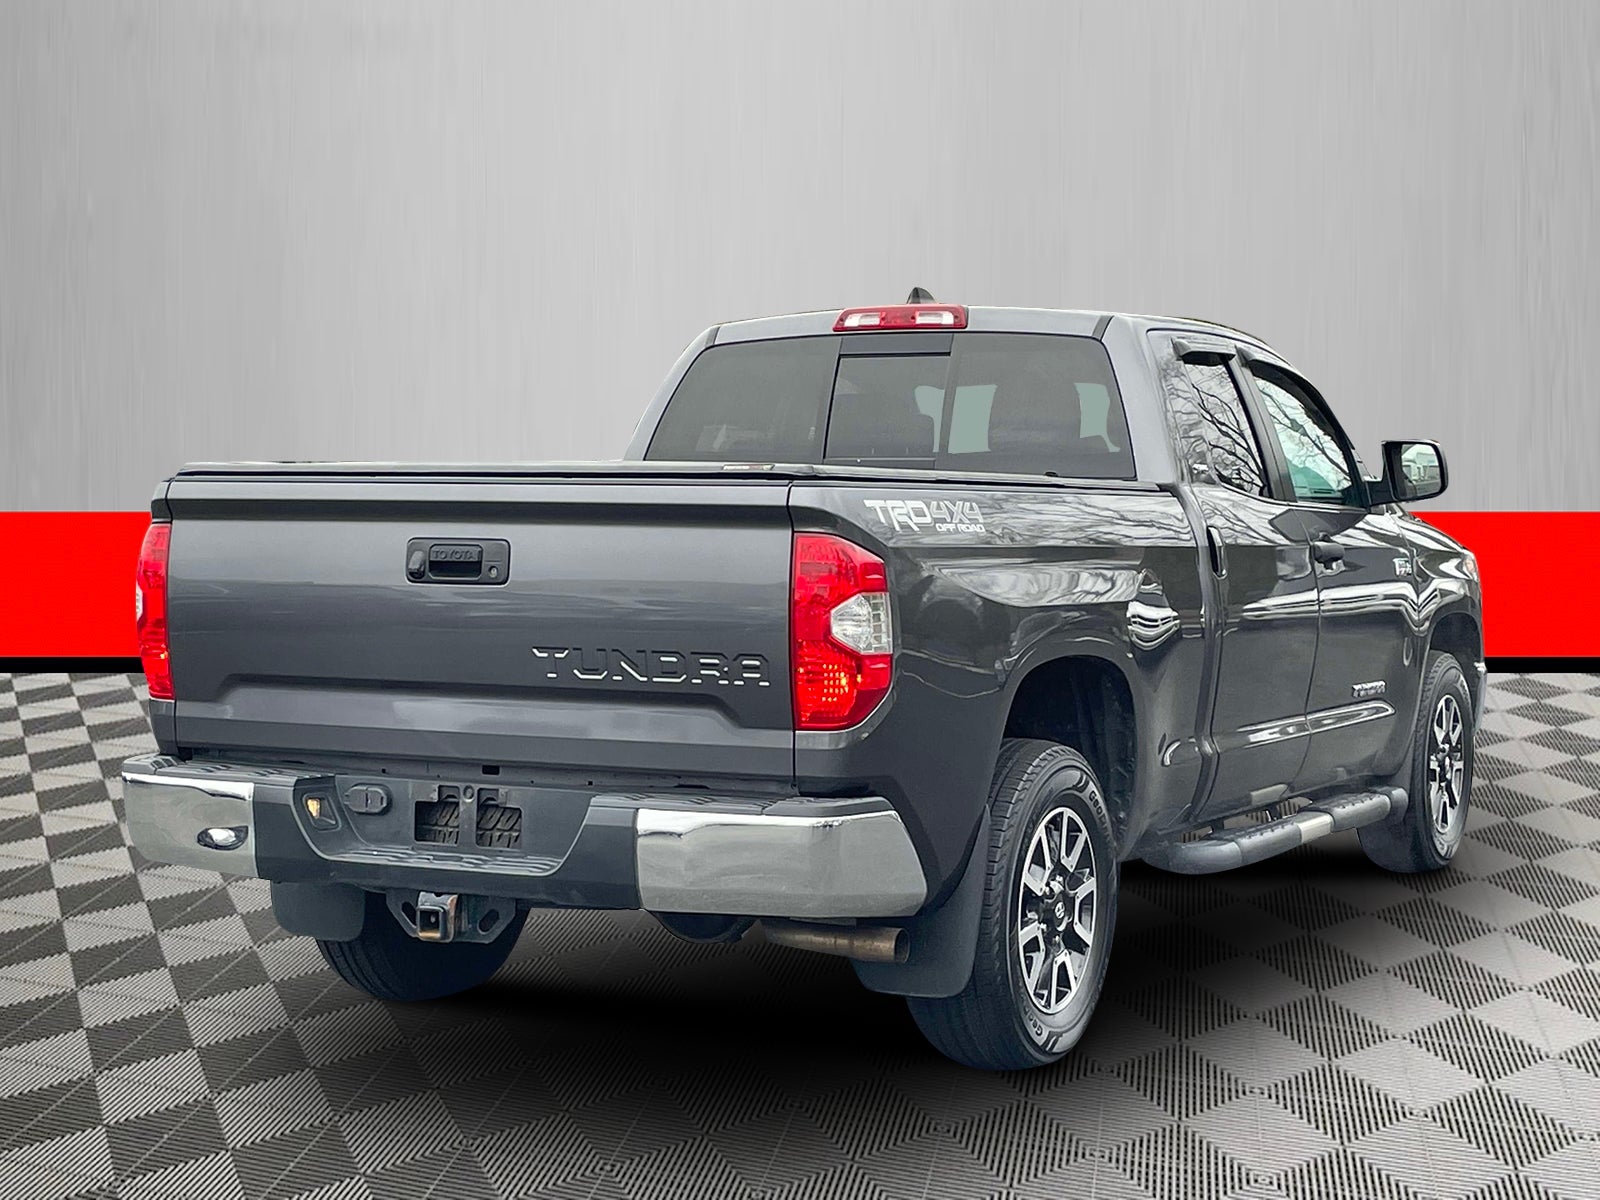 2021 Toyota Tundra 4WD SR5 Double Cab 6.5' Bed 5.7L (Natl)